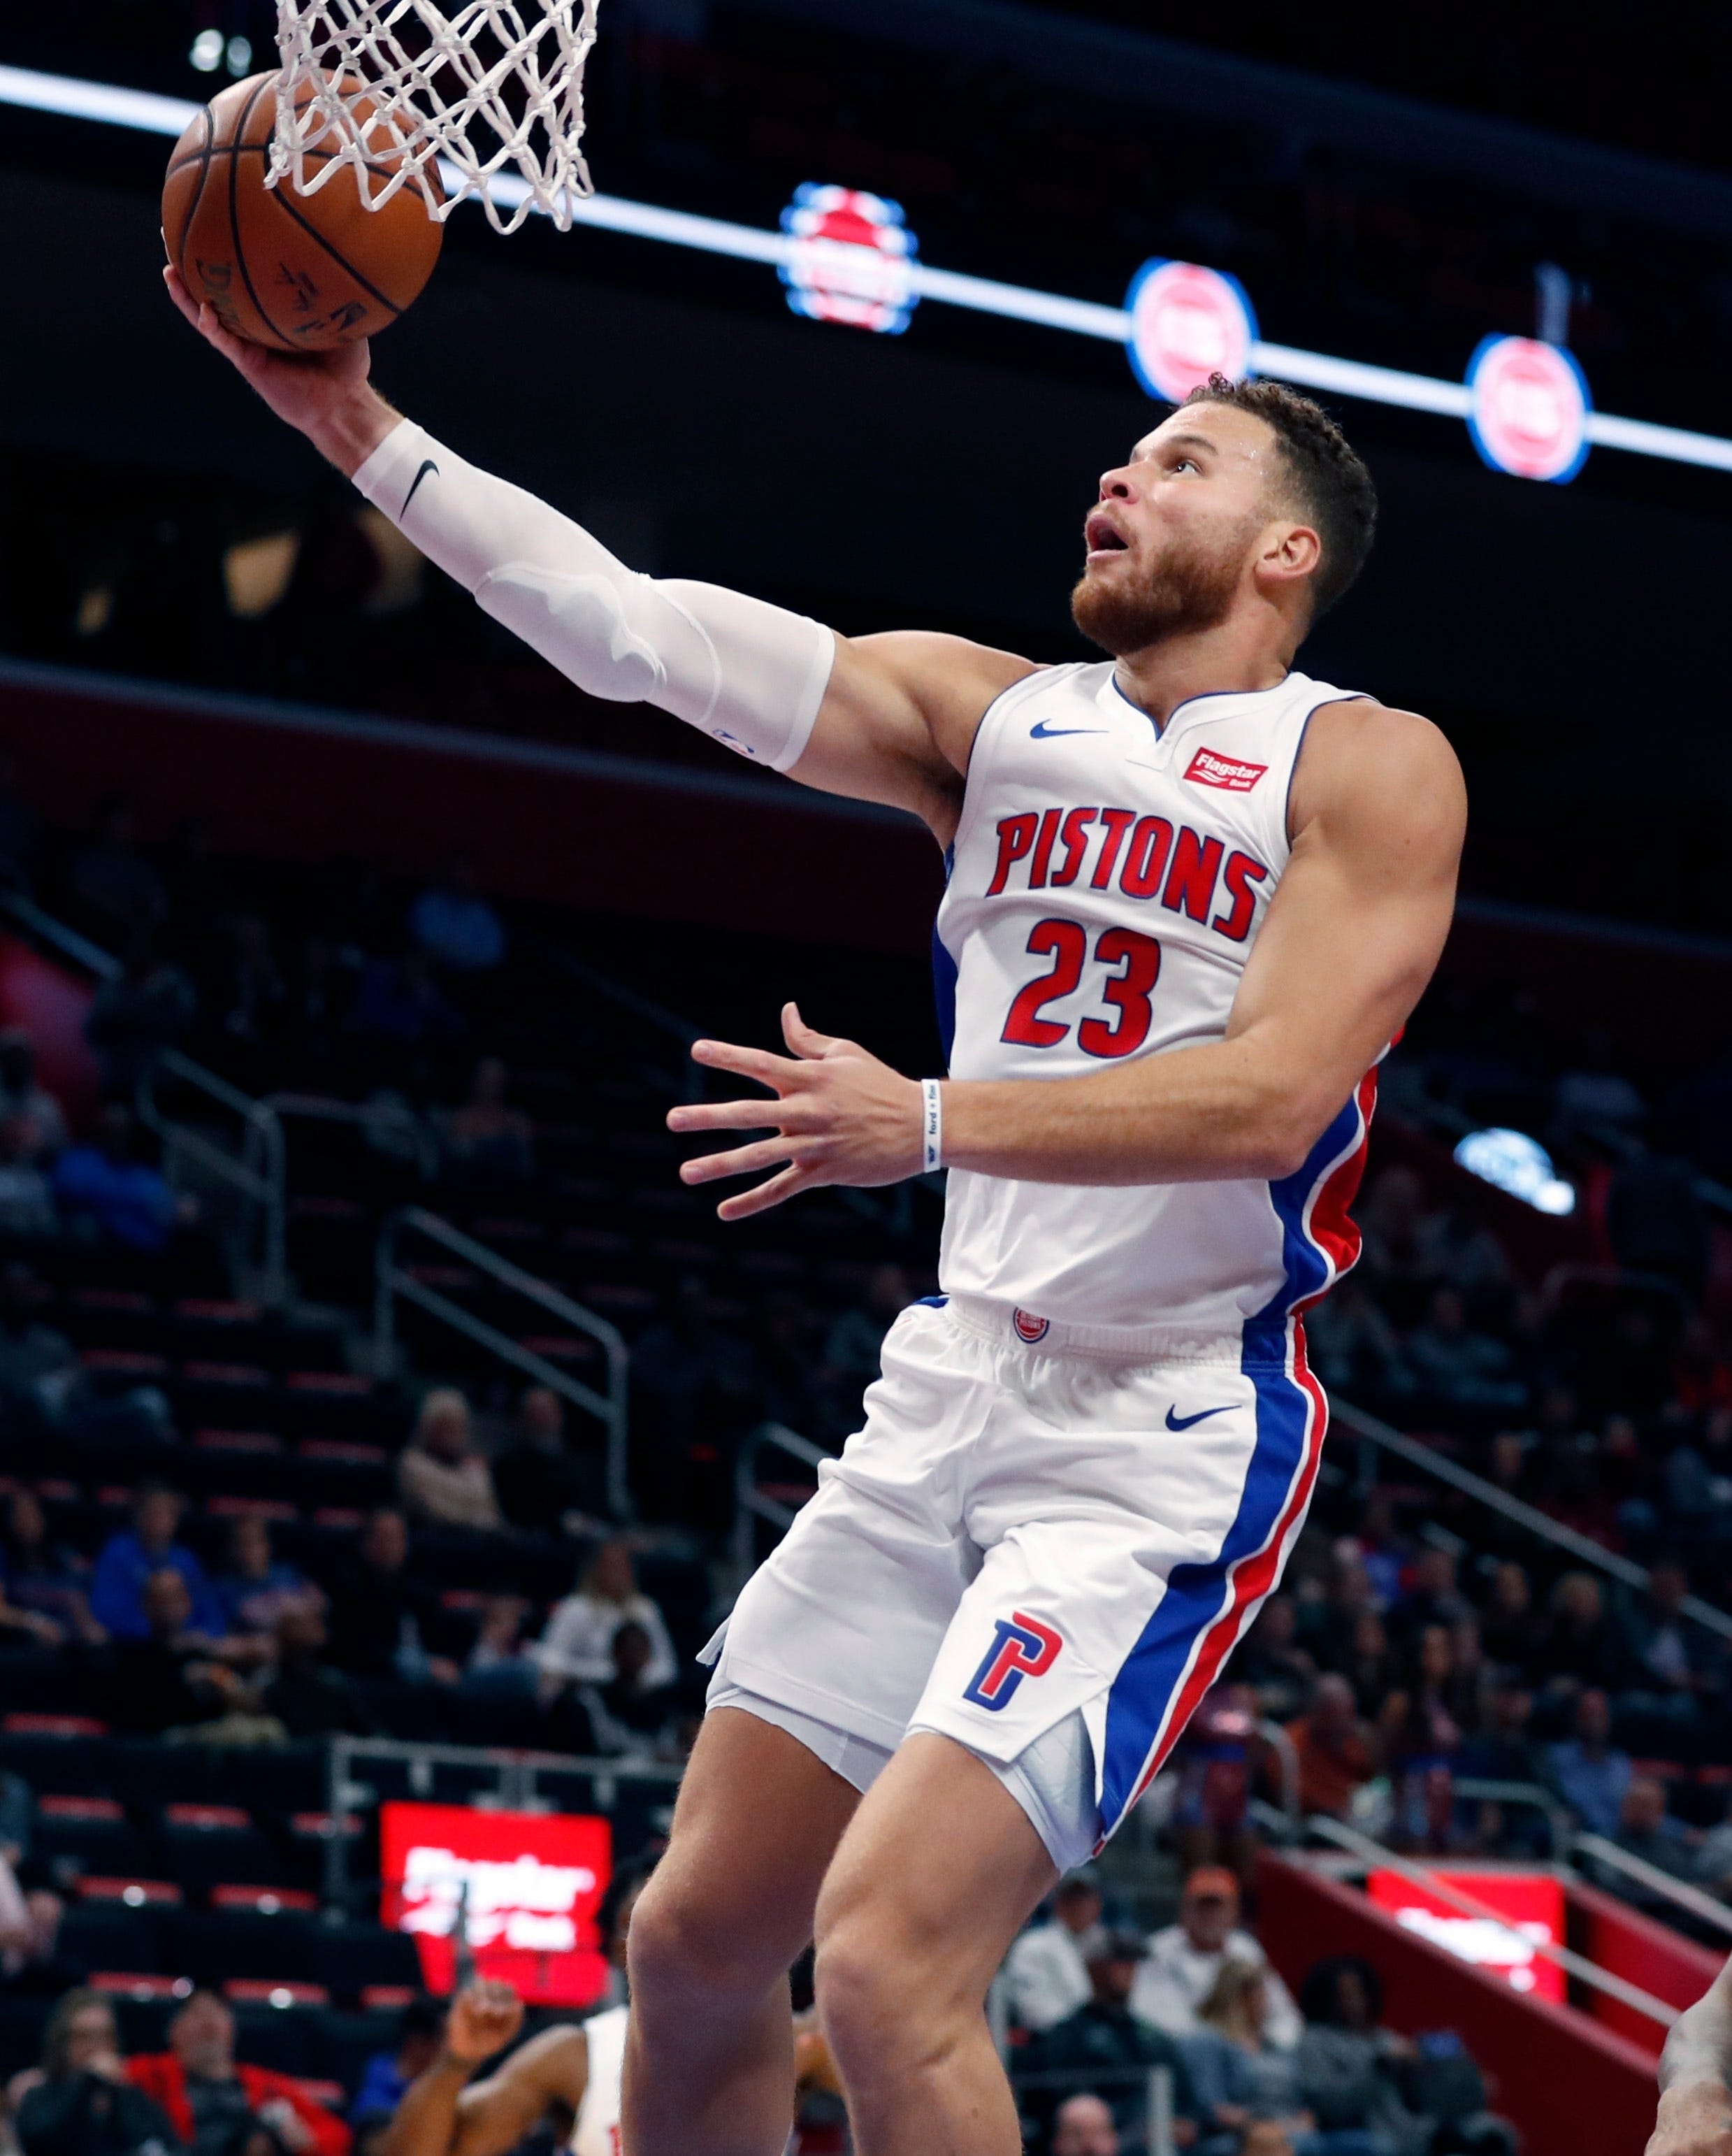 Detroit Pistons forward Blake Griffin makes a layup during the first half of an NBA basketball game against the Cleveland Cavaliers, Thursday, Oct. 25, 2018, in Detroit.